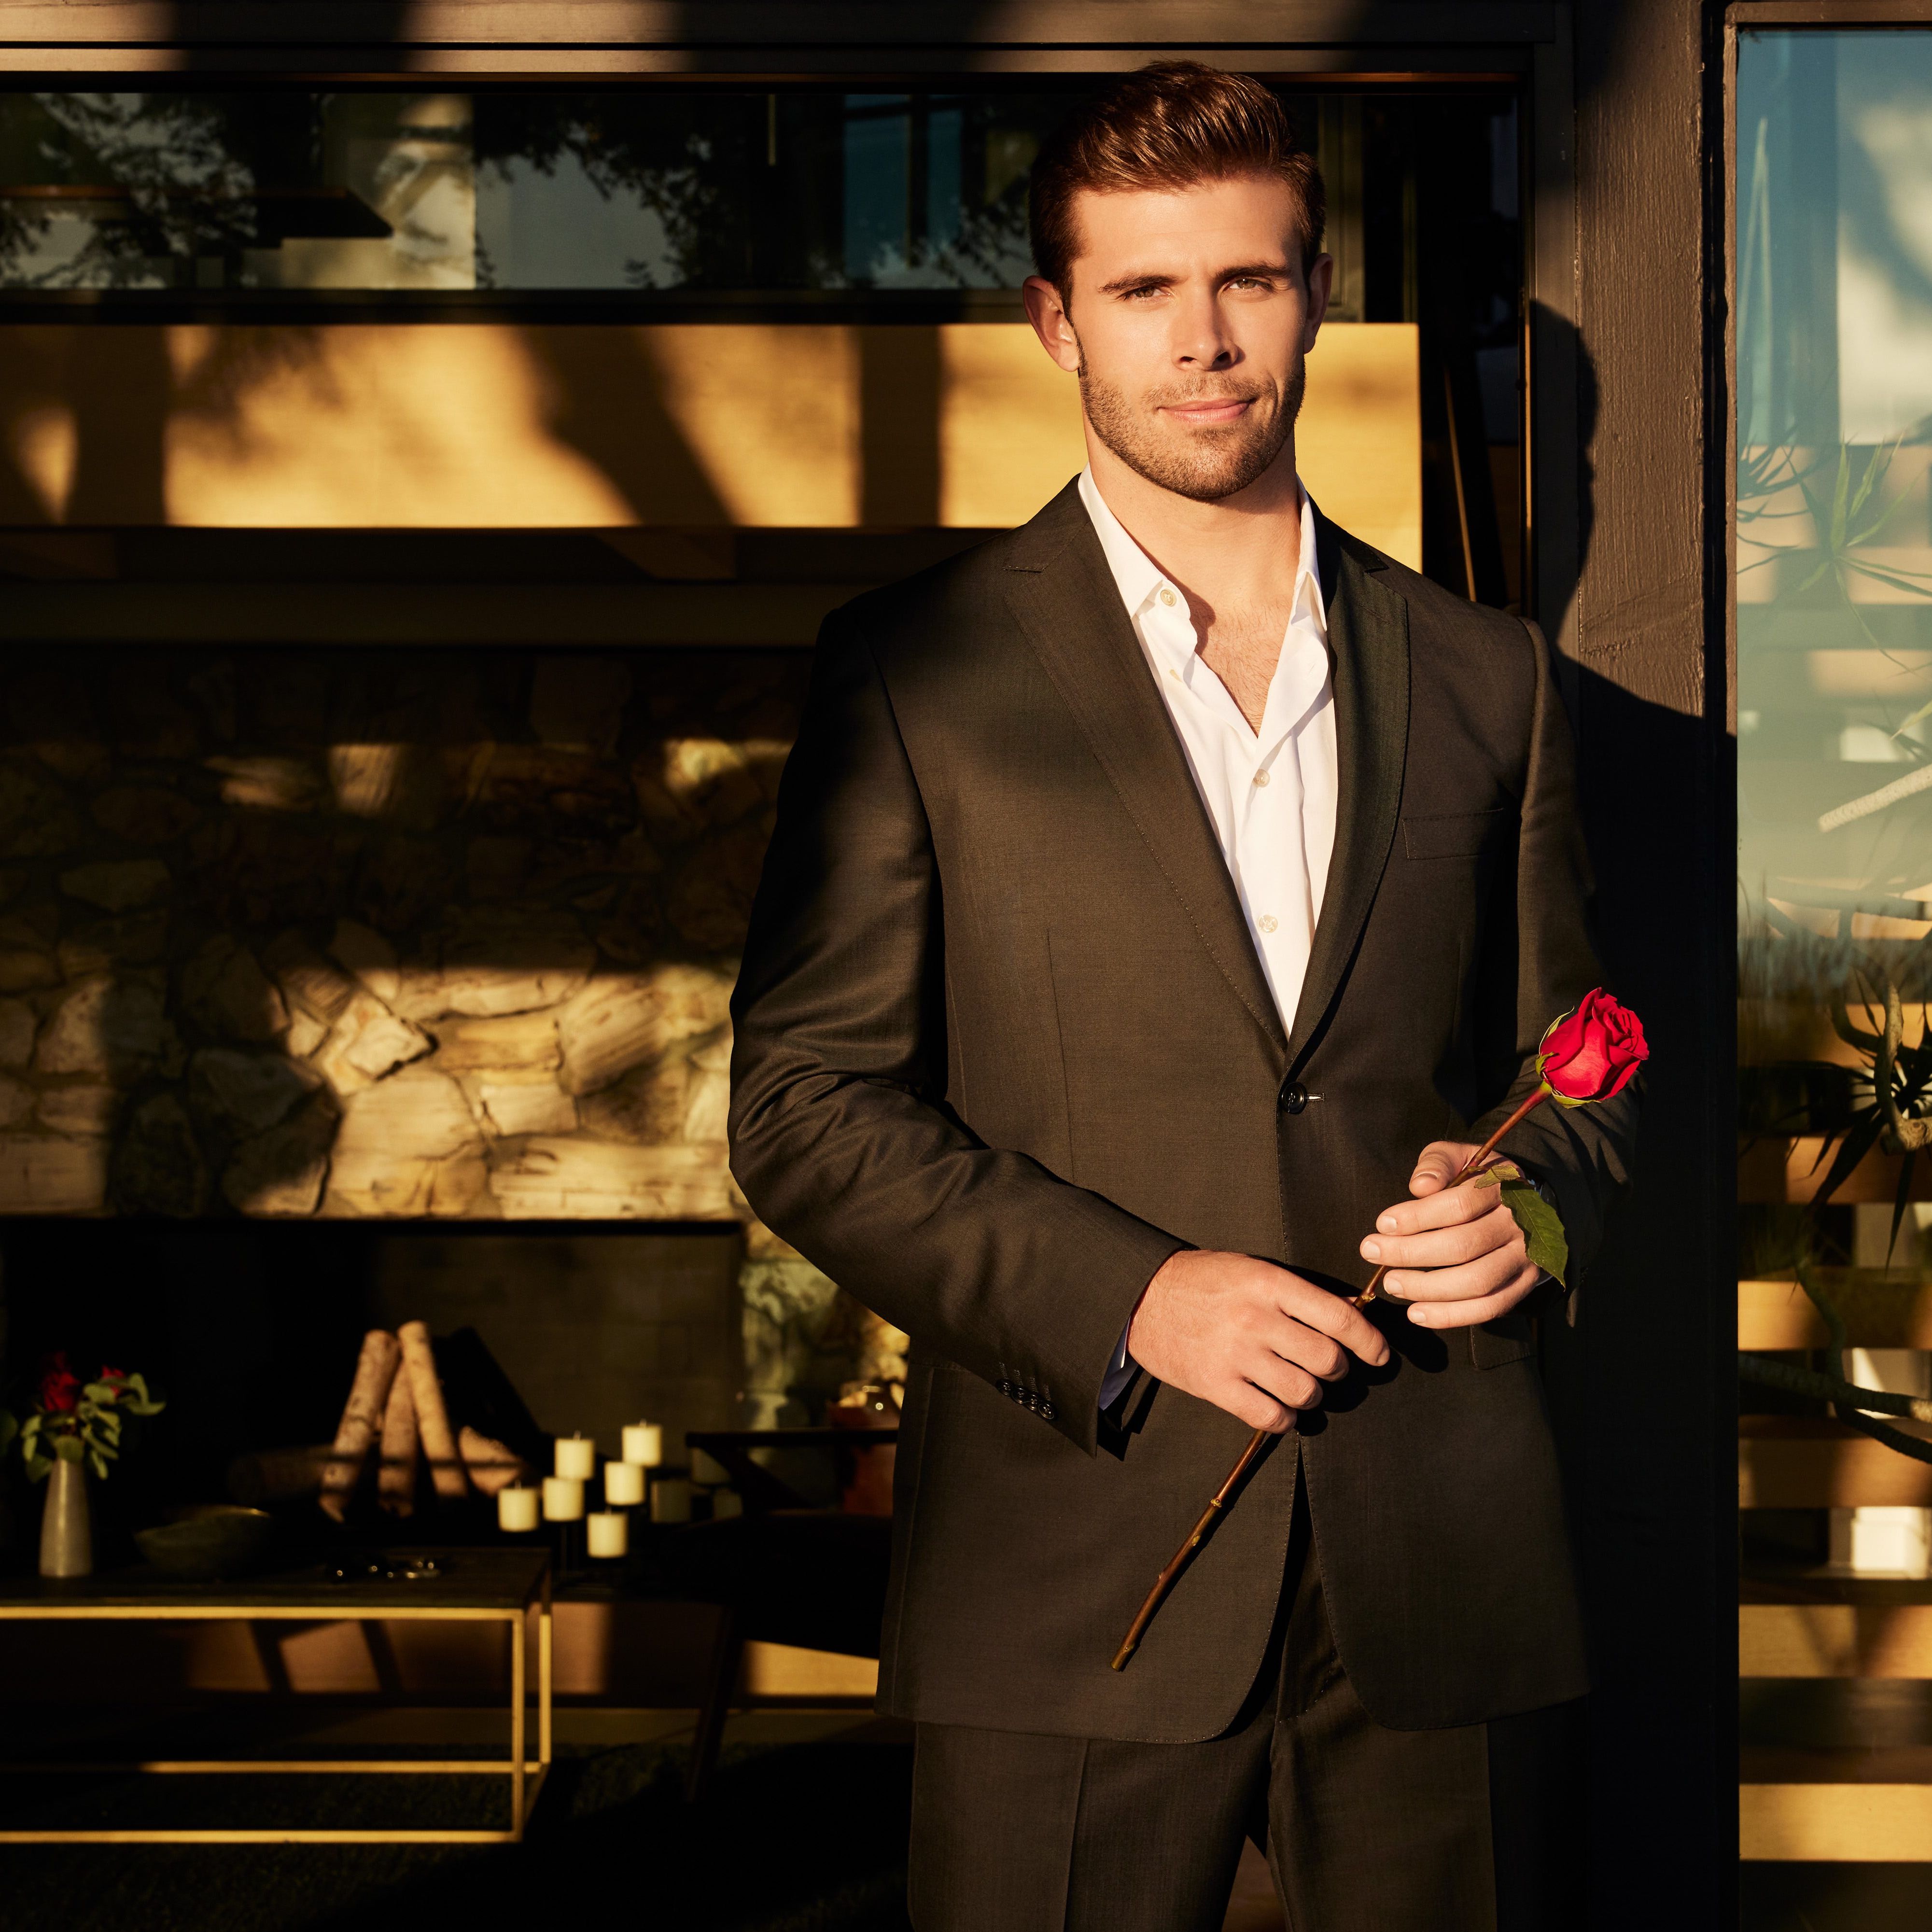 I Don't Have It in Me to Root for Another Mediocre White Guy on 'The Bachelor'